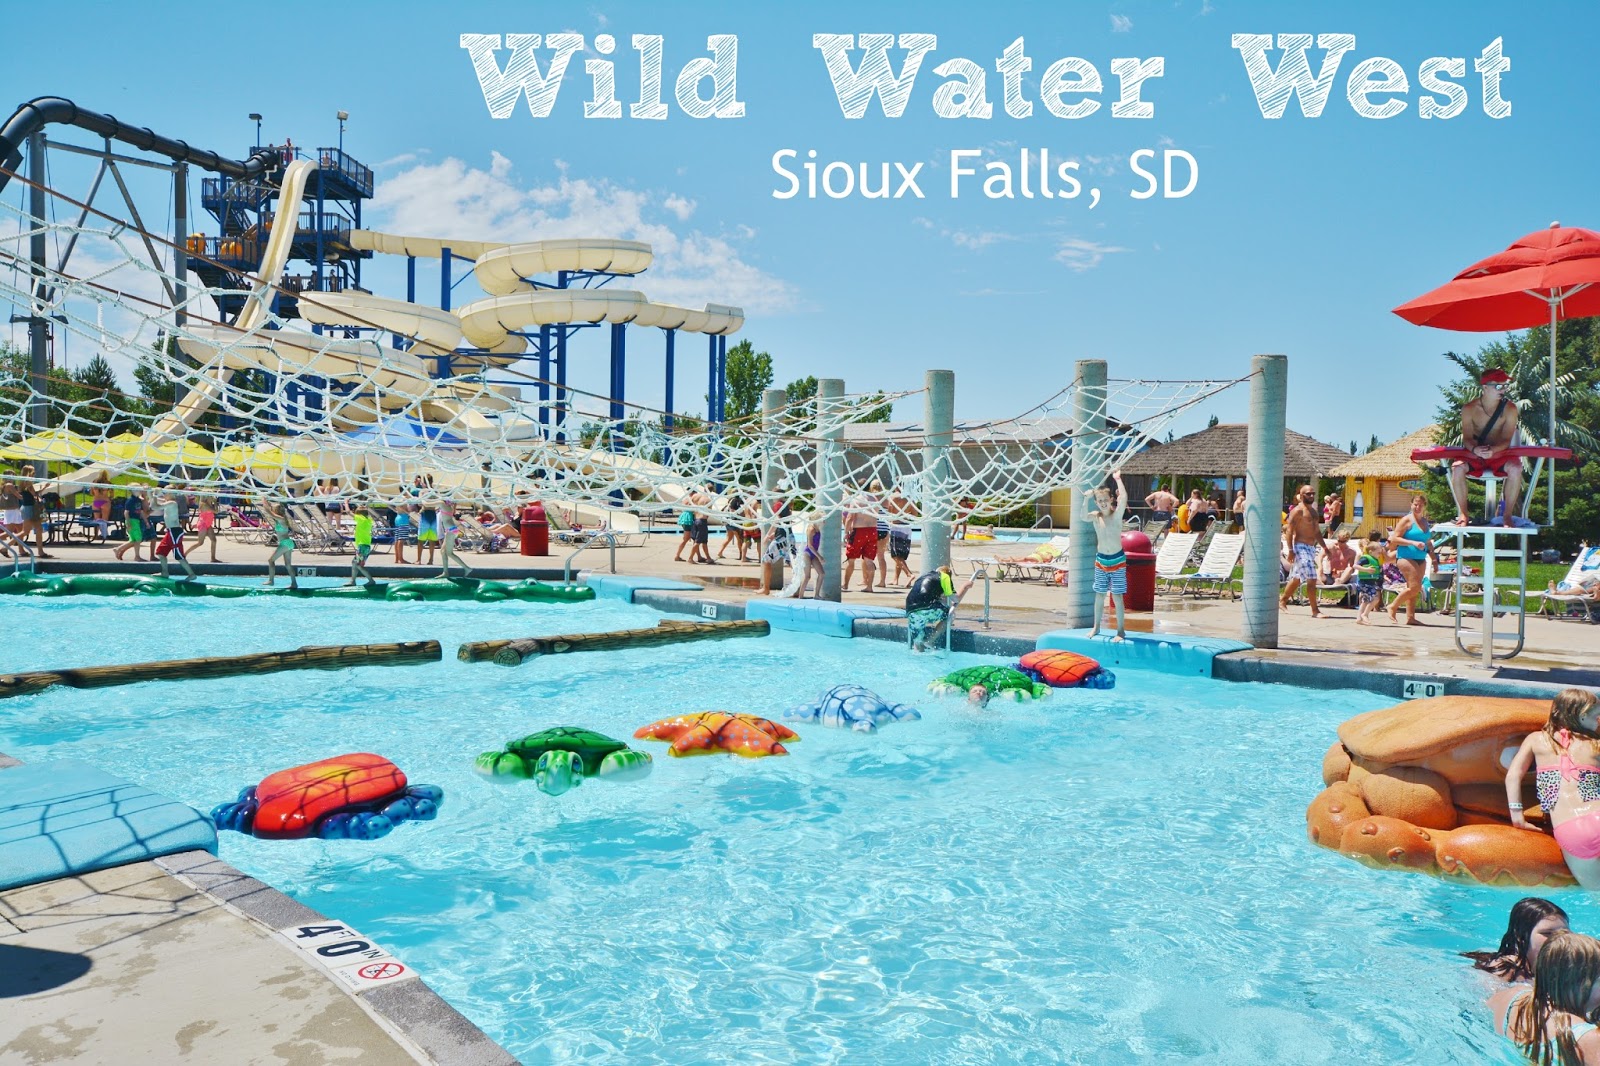 South Dakota's largest waterpark, Wild Water West is a must do #attraction in Sioux Falls! #70dayroadtrip #travel